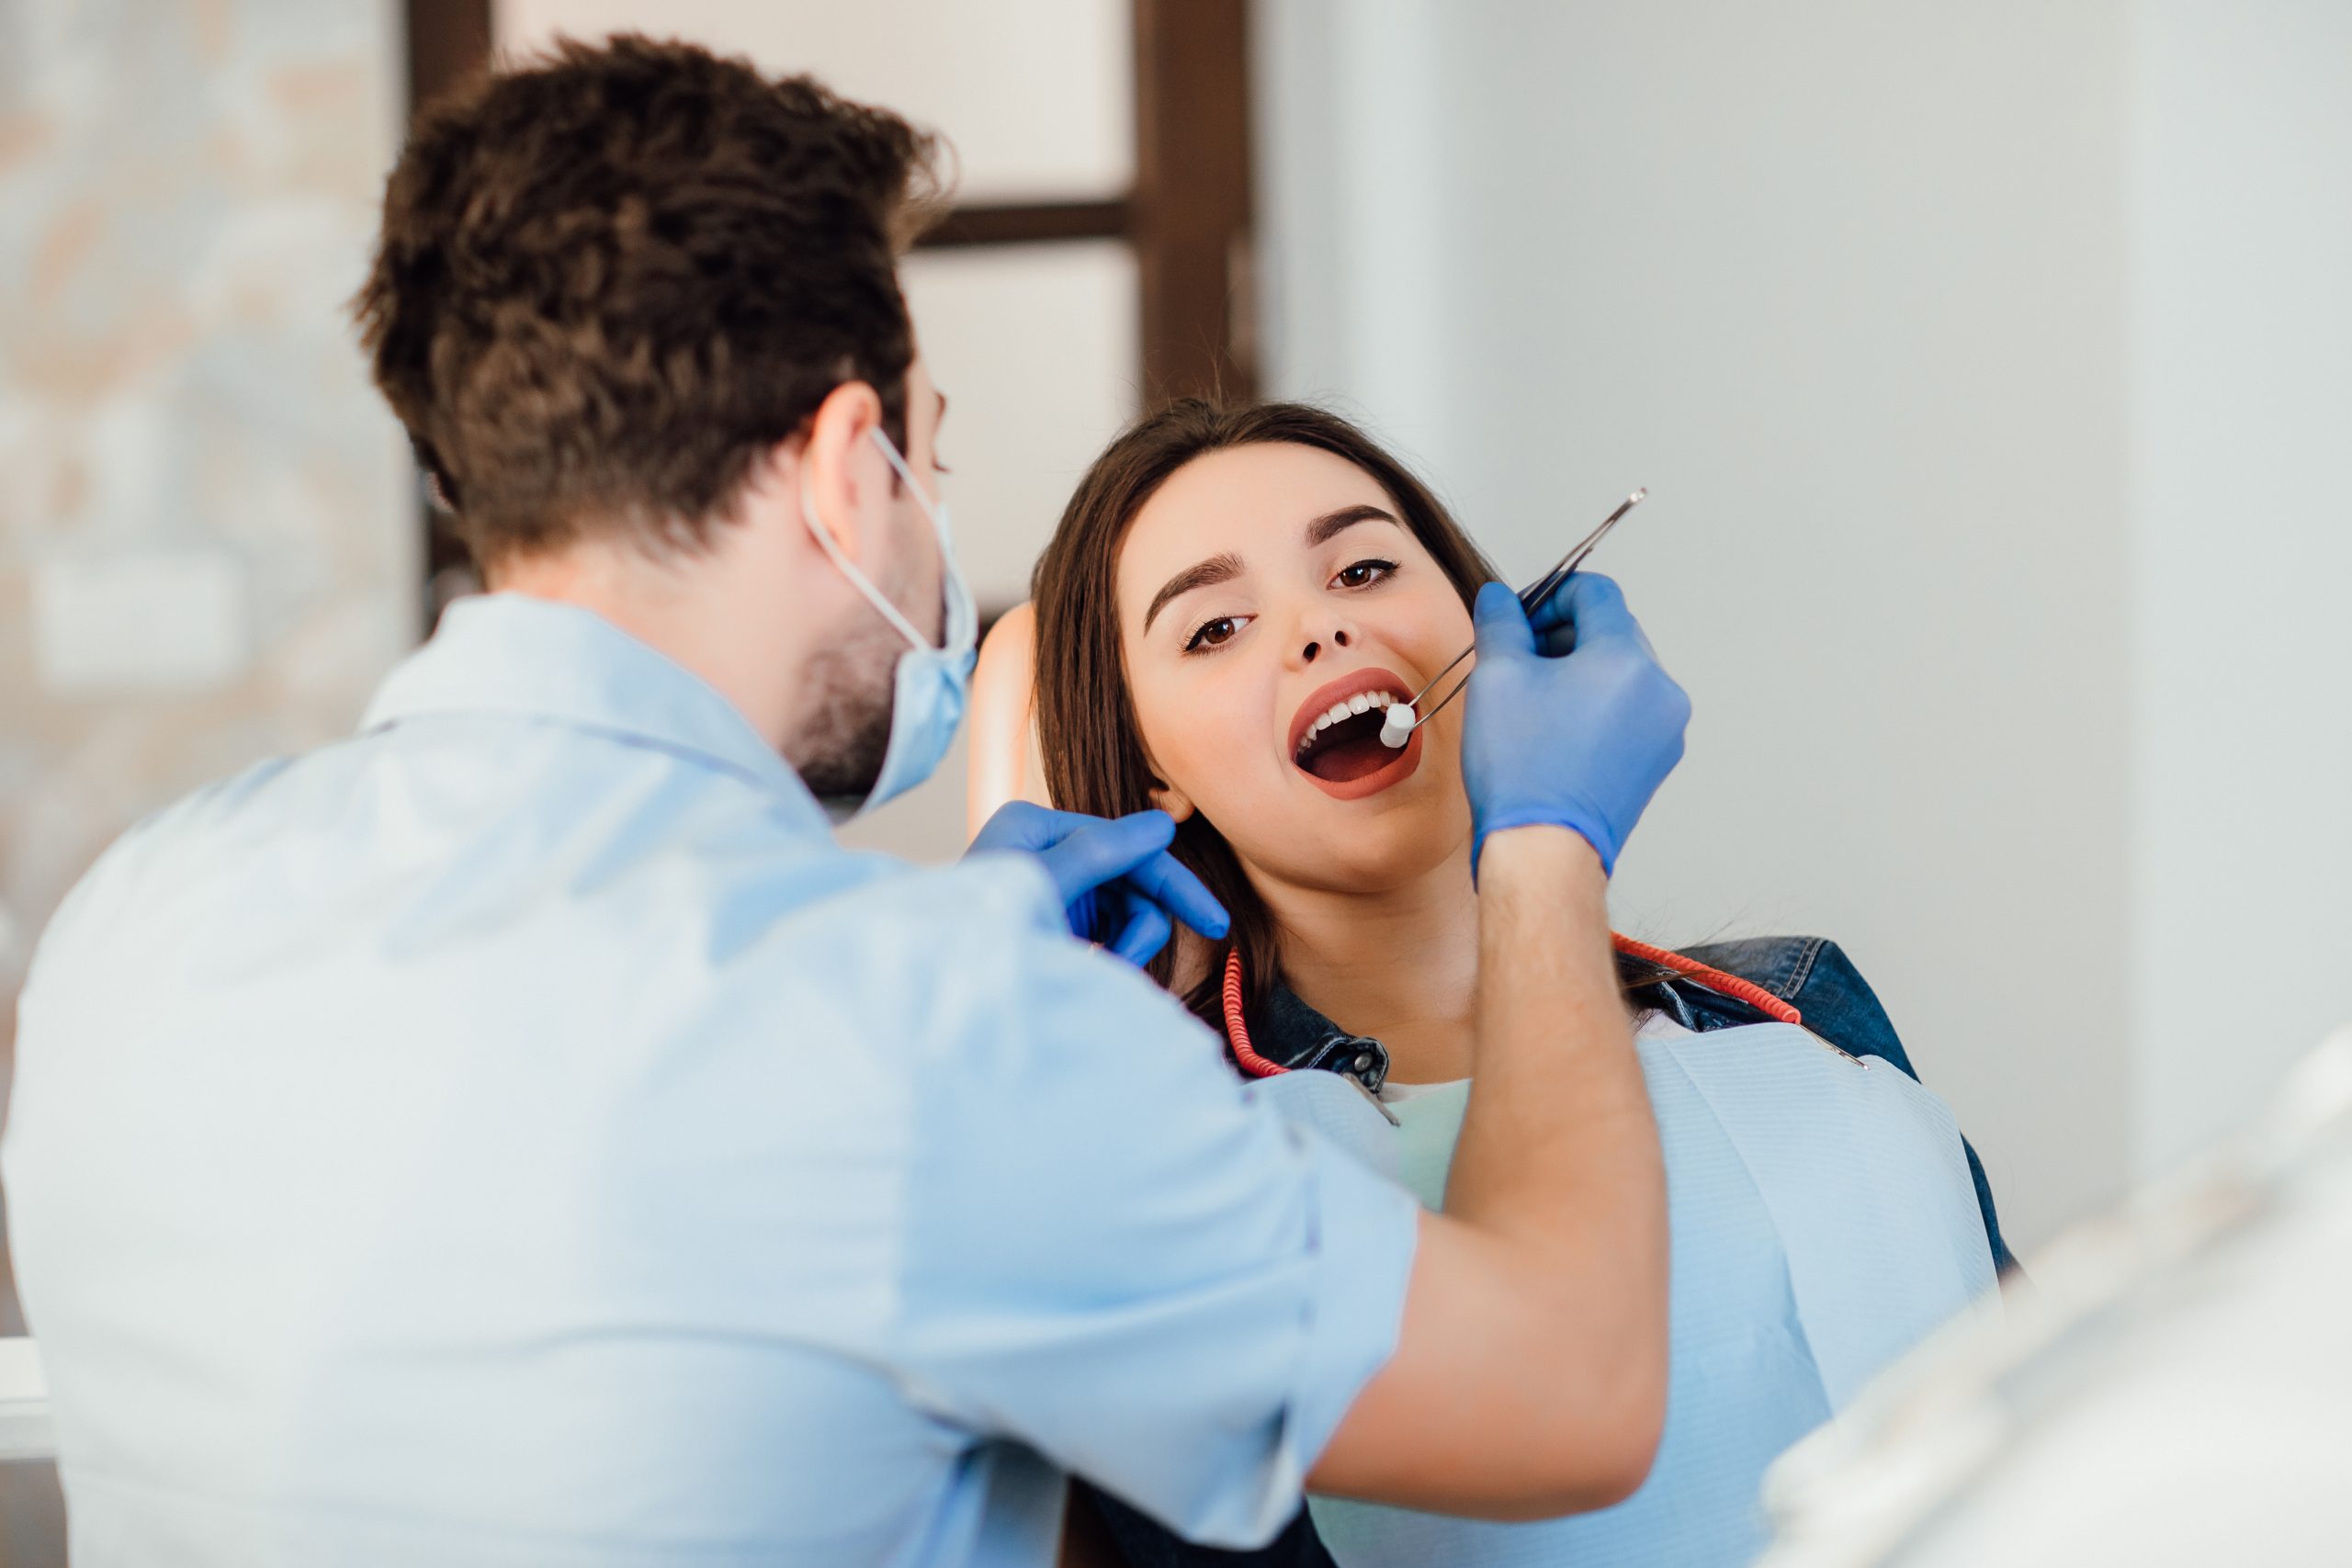 What Can I Expect During a Dental Checkup at Lebanon Park Dental Group?